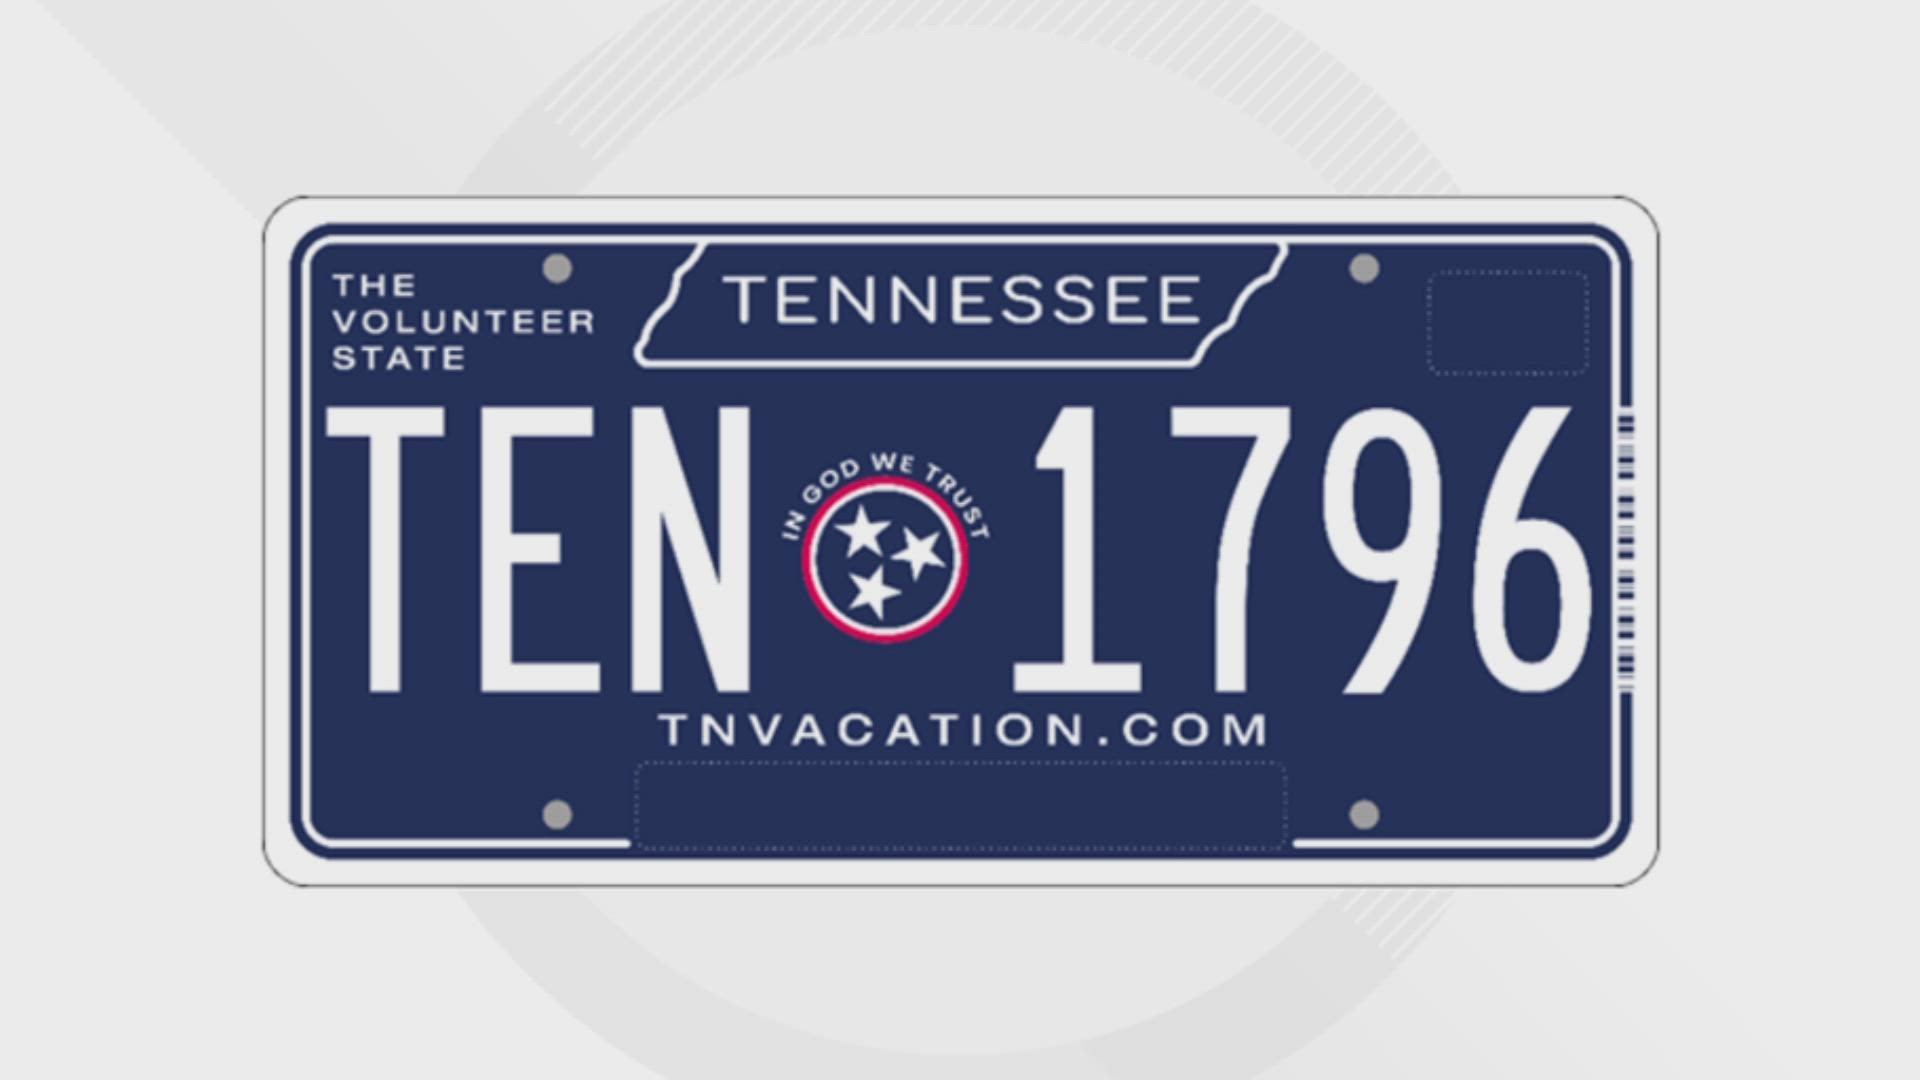 The new license plates are available online and in person, whenever people renew their vehicle registration.